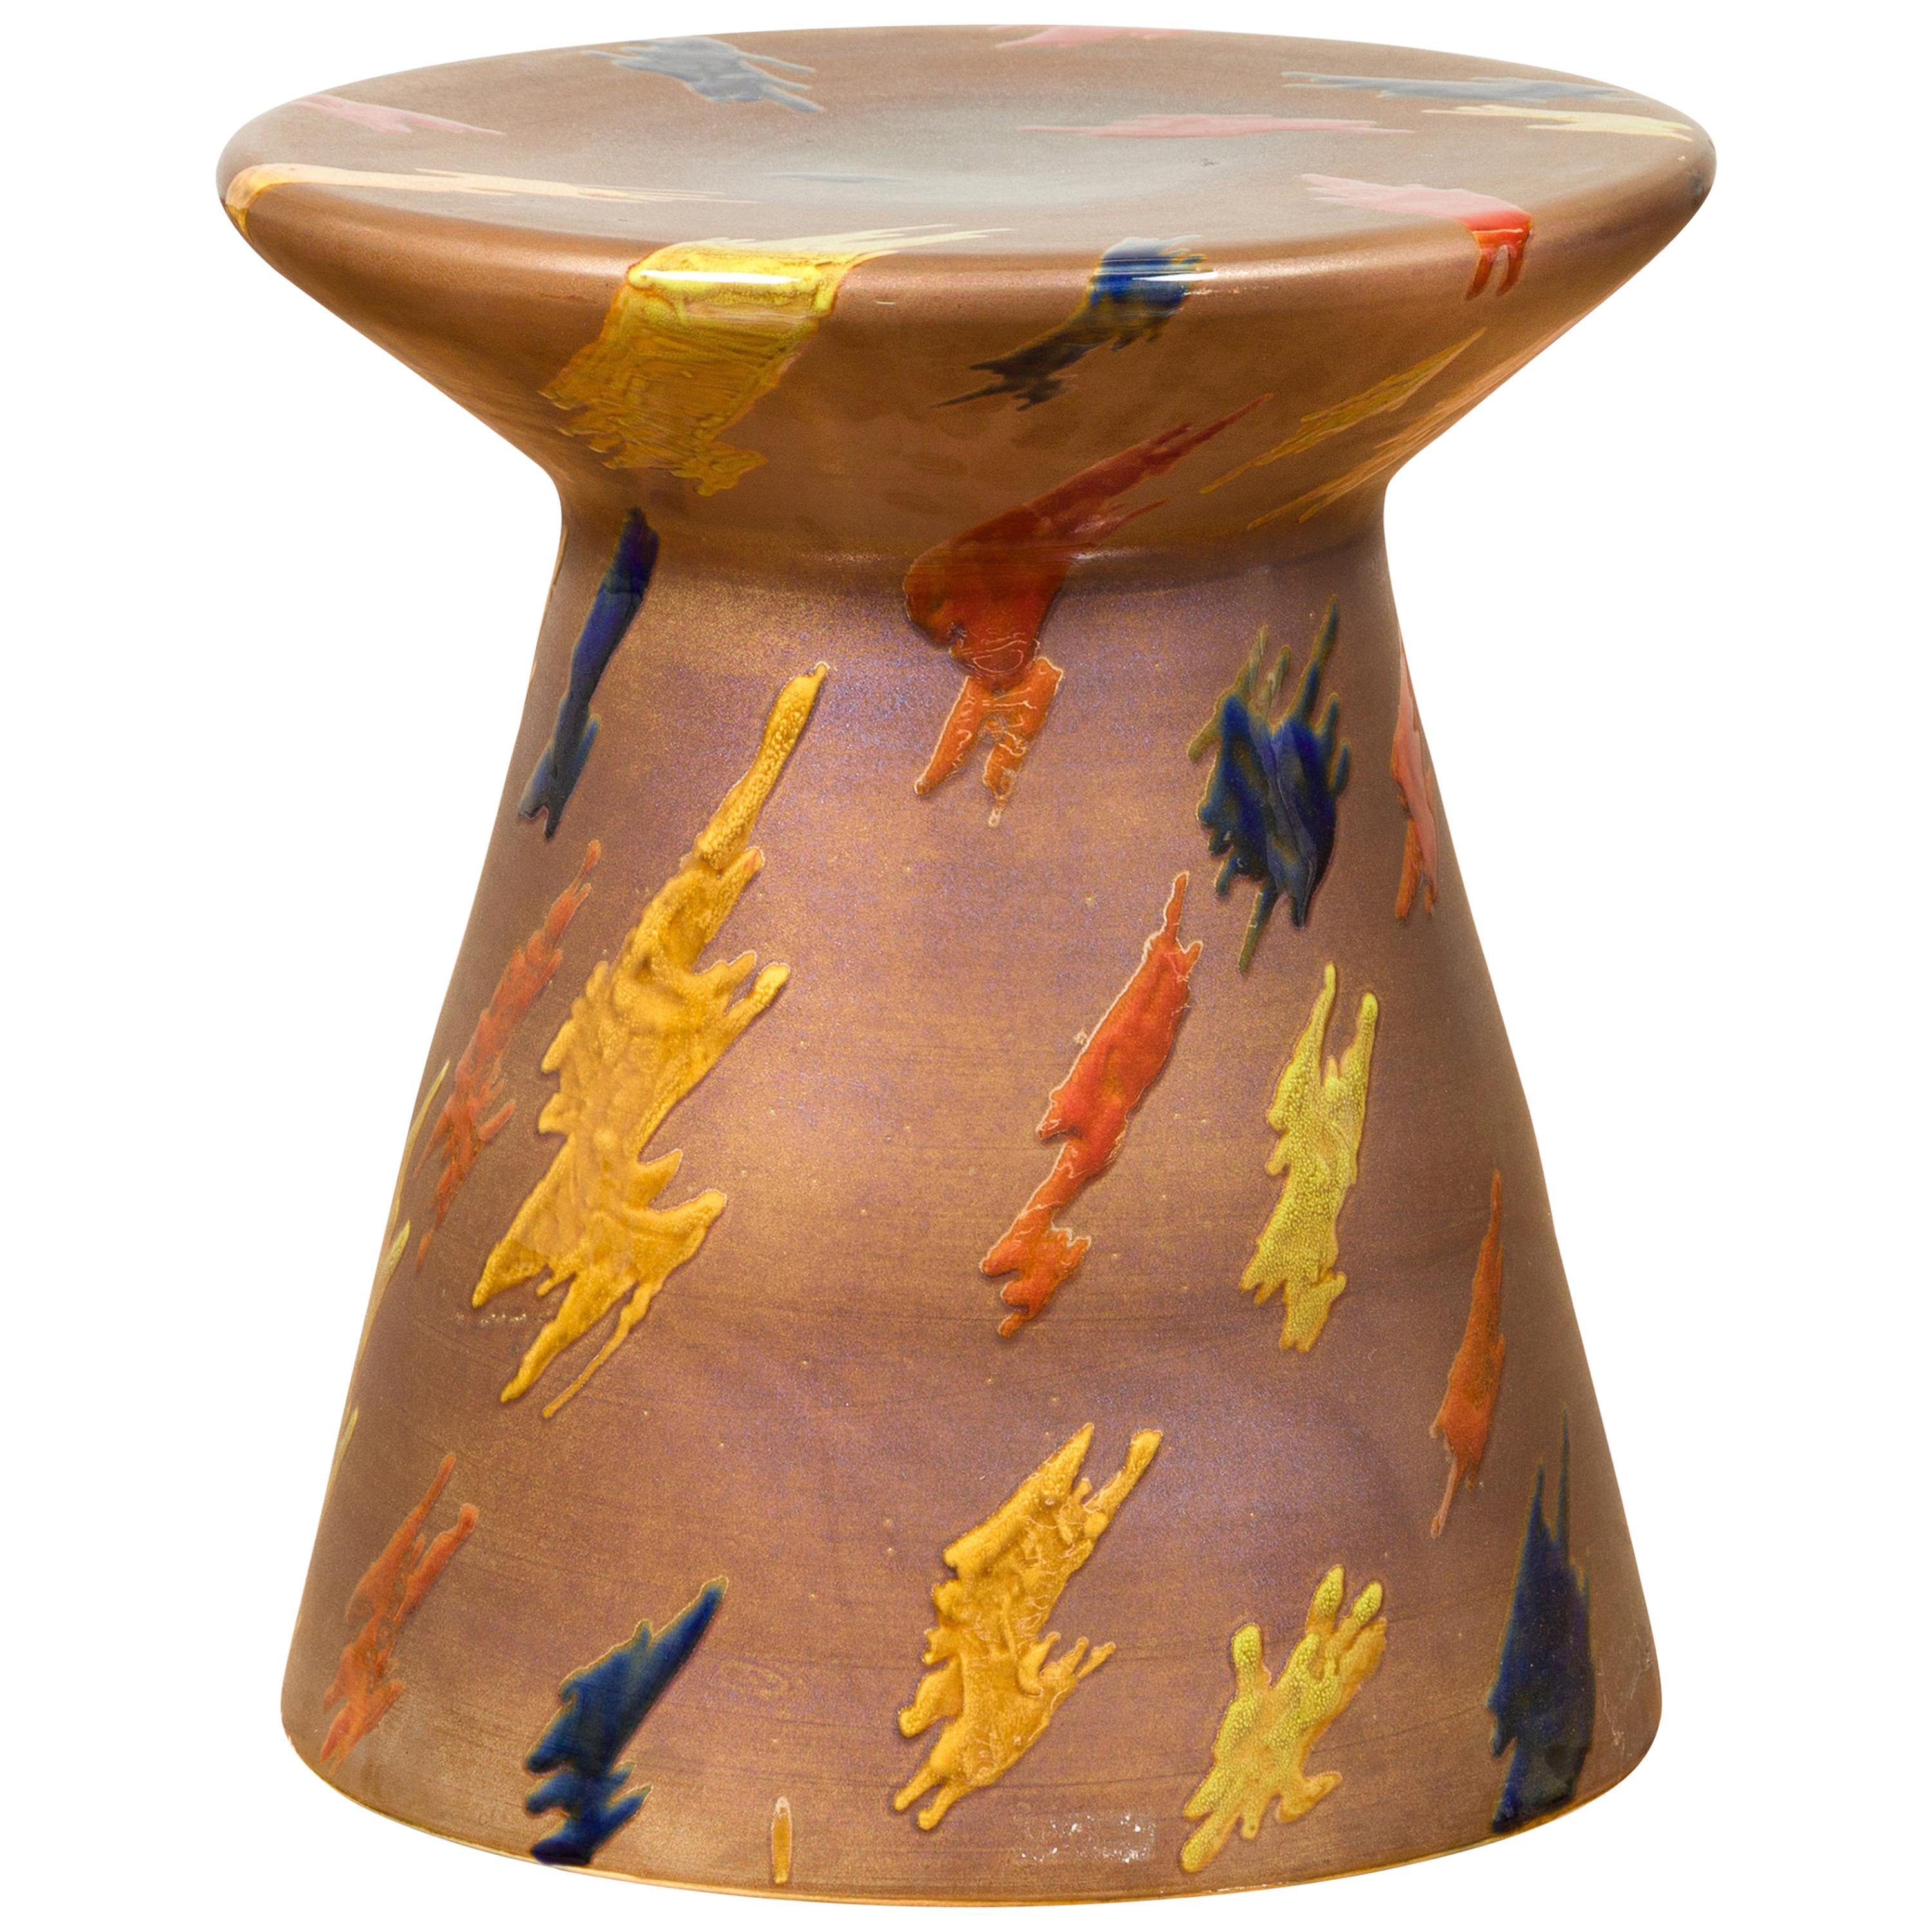 Artisan Glazed and Hand Painted Garden Seat with Orange, Yellow and Blue Accents For Sale